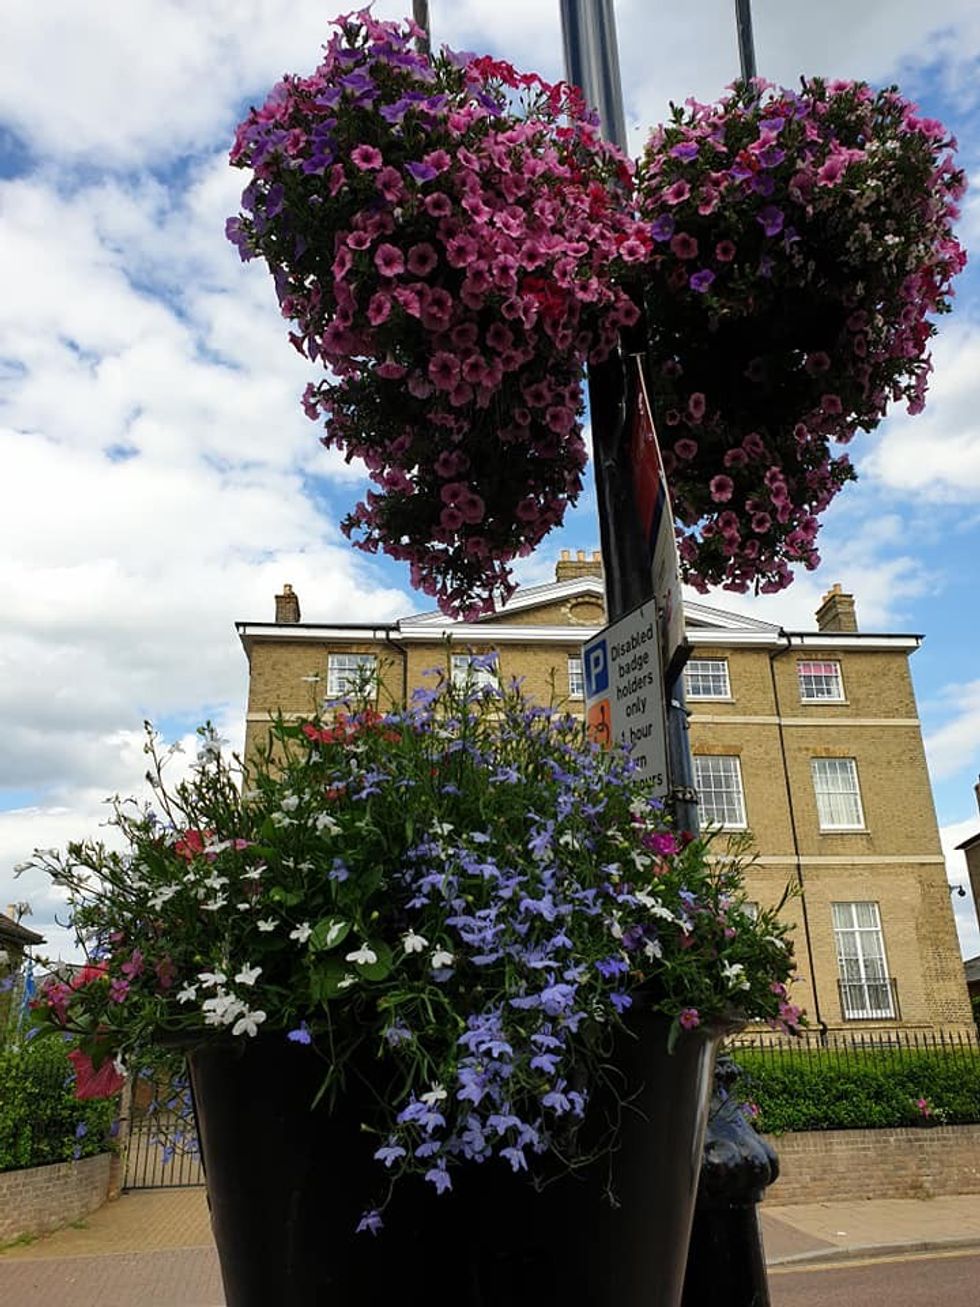 Members of Chatteris in Bloom were otherwise warned contractors would have to be hired at huge expense to do the job